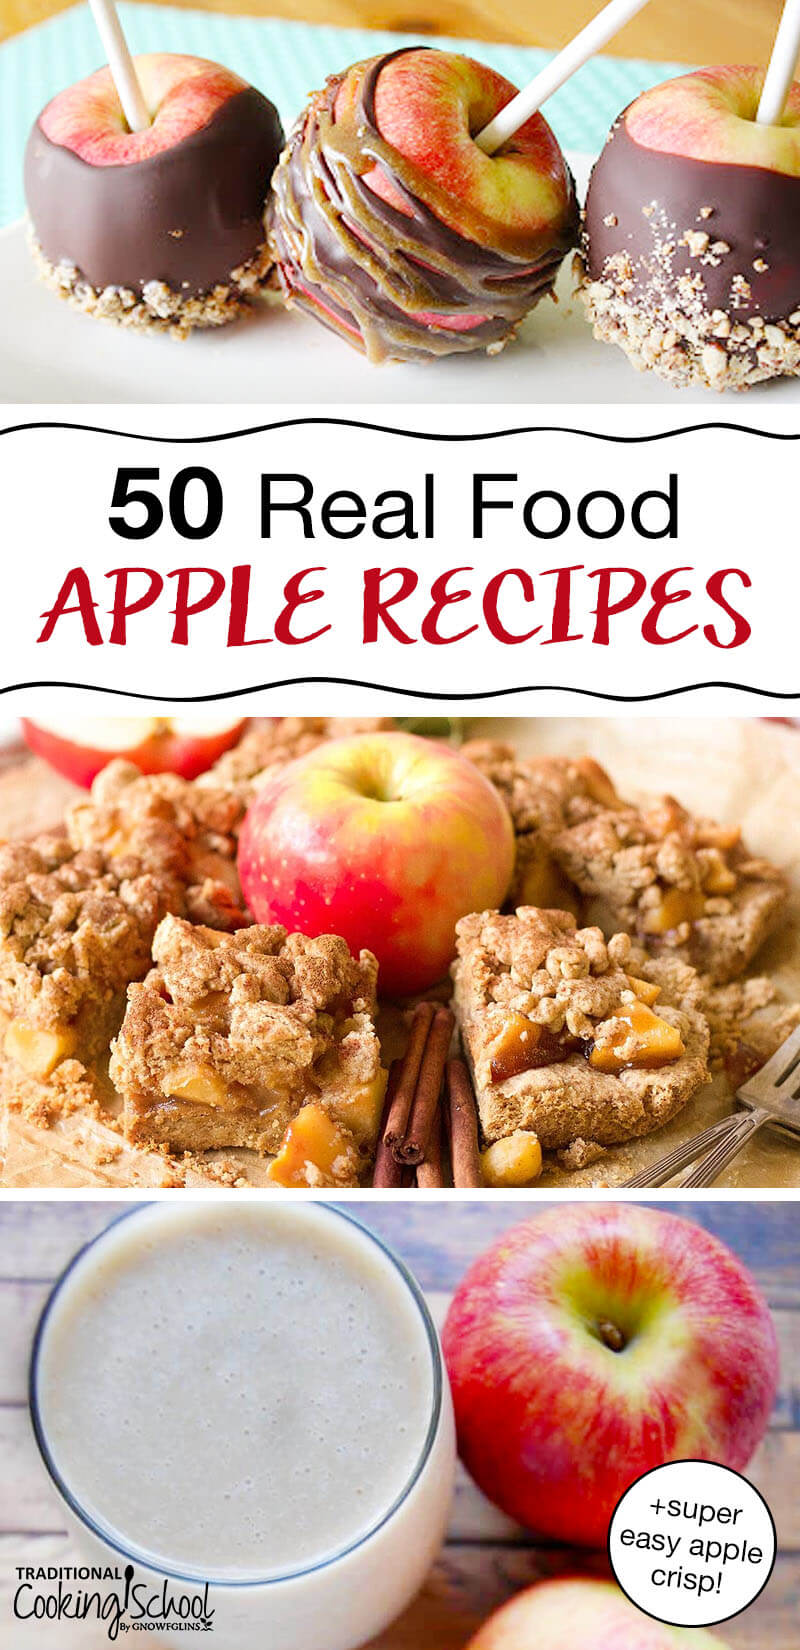 photo collage of chocolate caramel apples, apple shortbread bars, and an apple pie latte, with text overlay: "50 Real Food Apple Recipes + super easy apple crisp!"